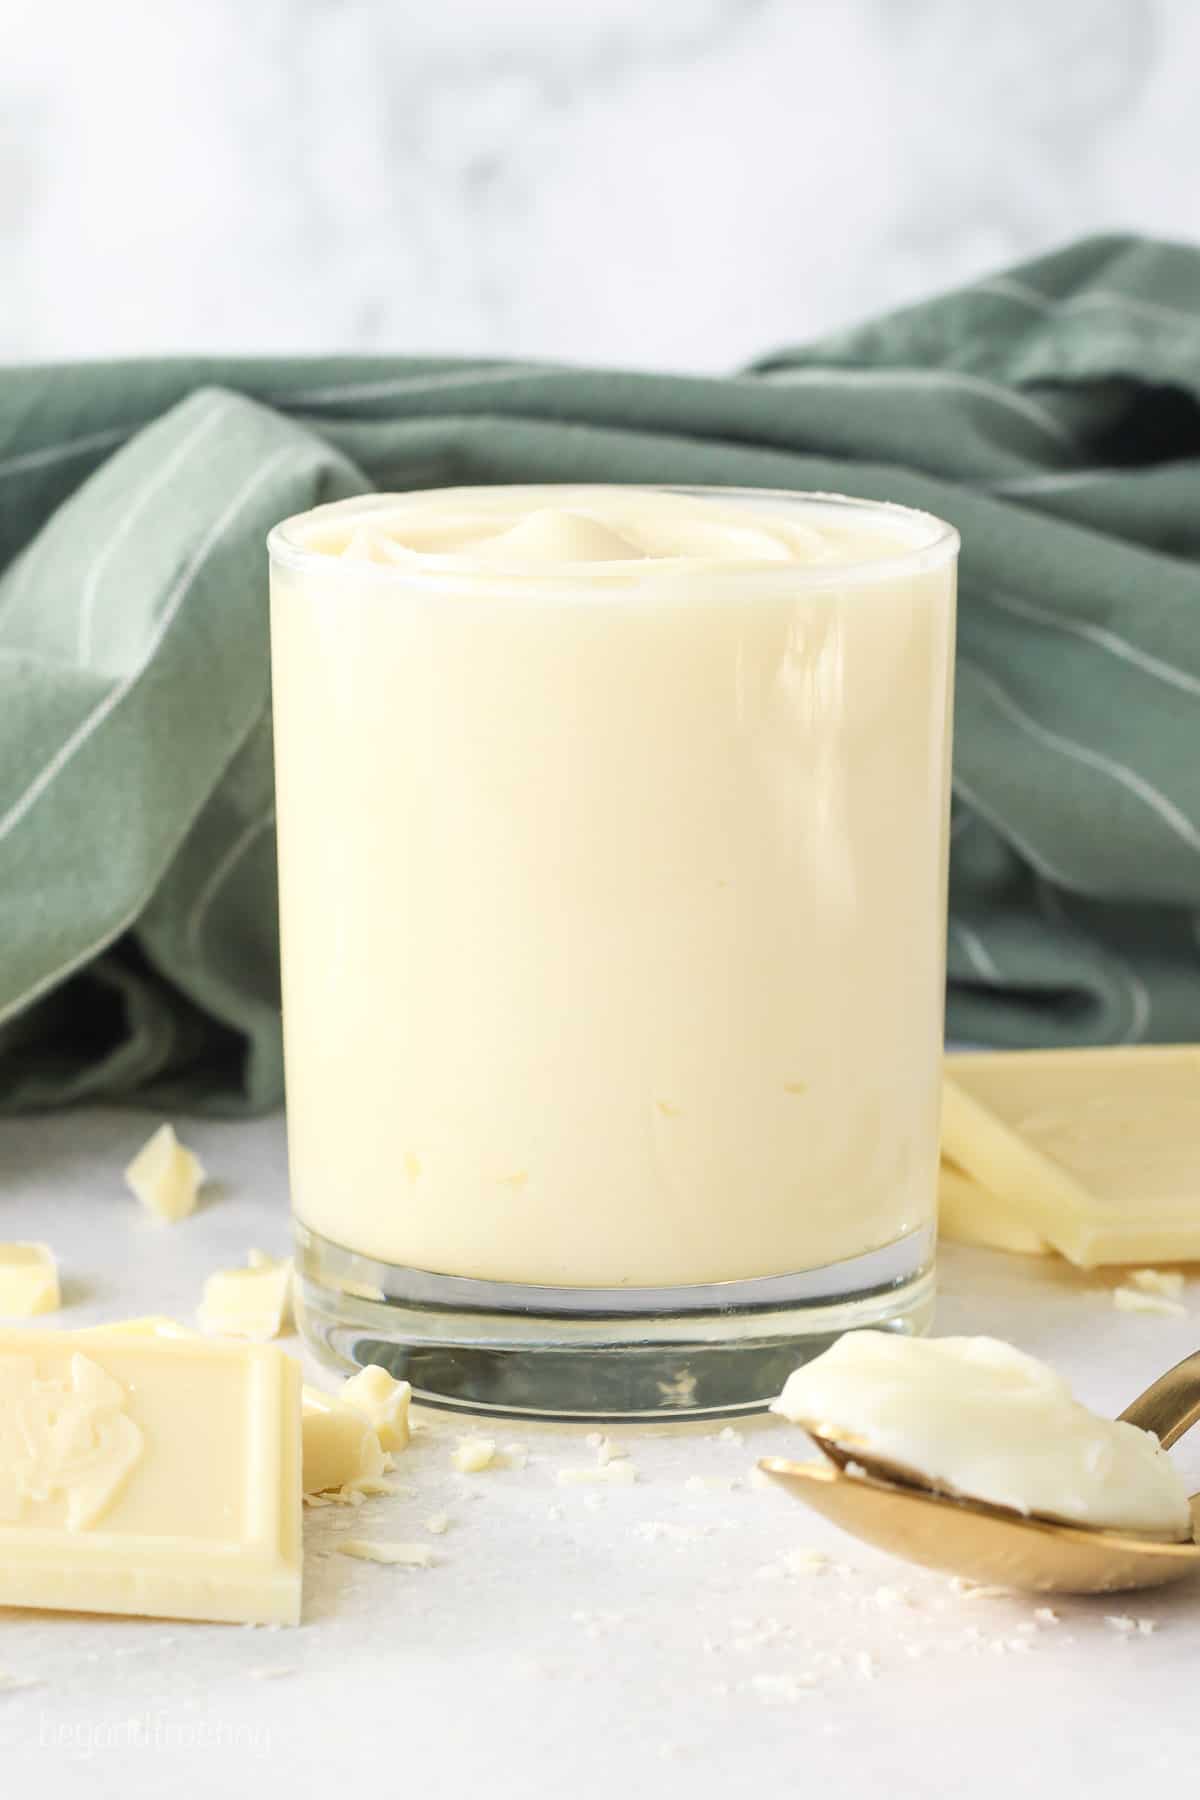 A glass of white chocolate ganache next to scattered white chocolate pieces.